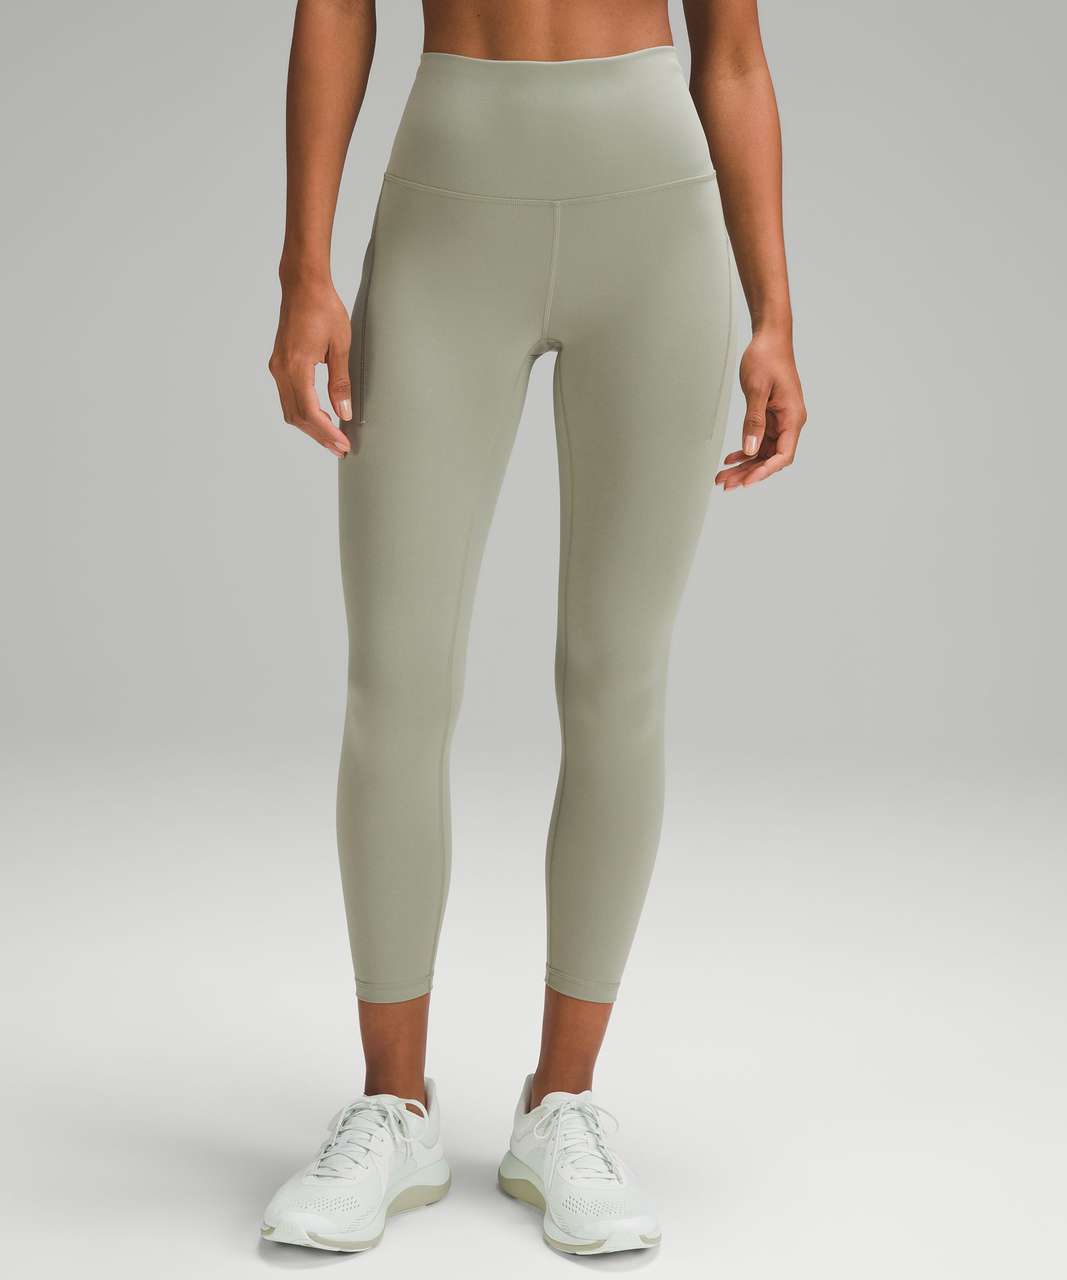 Lululemon Wunder Train High-Rise Tight with Pockets 25" - Laurel Green